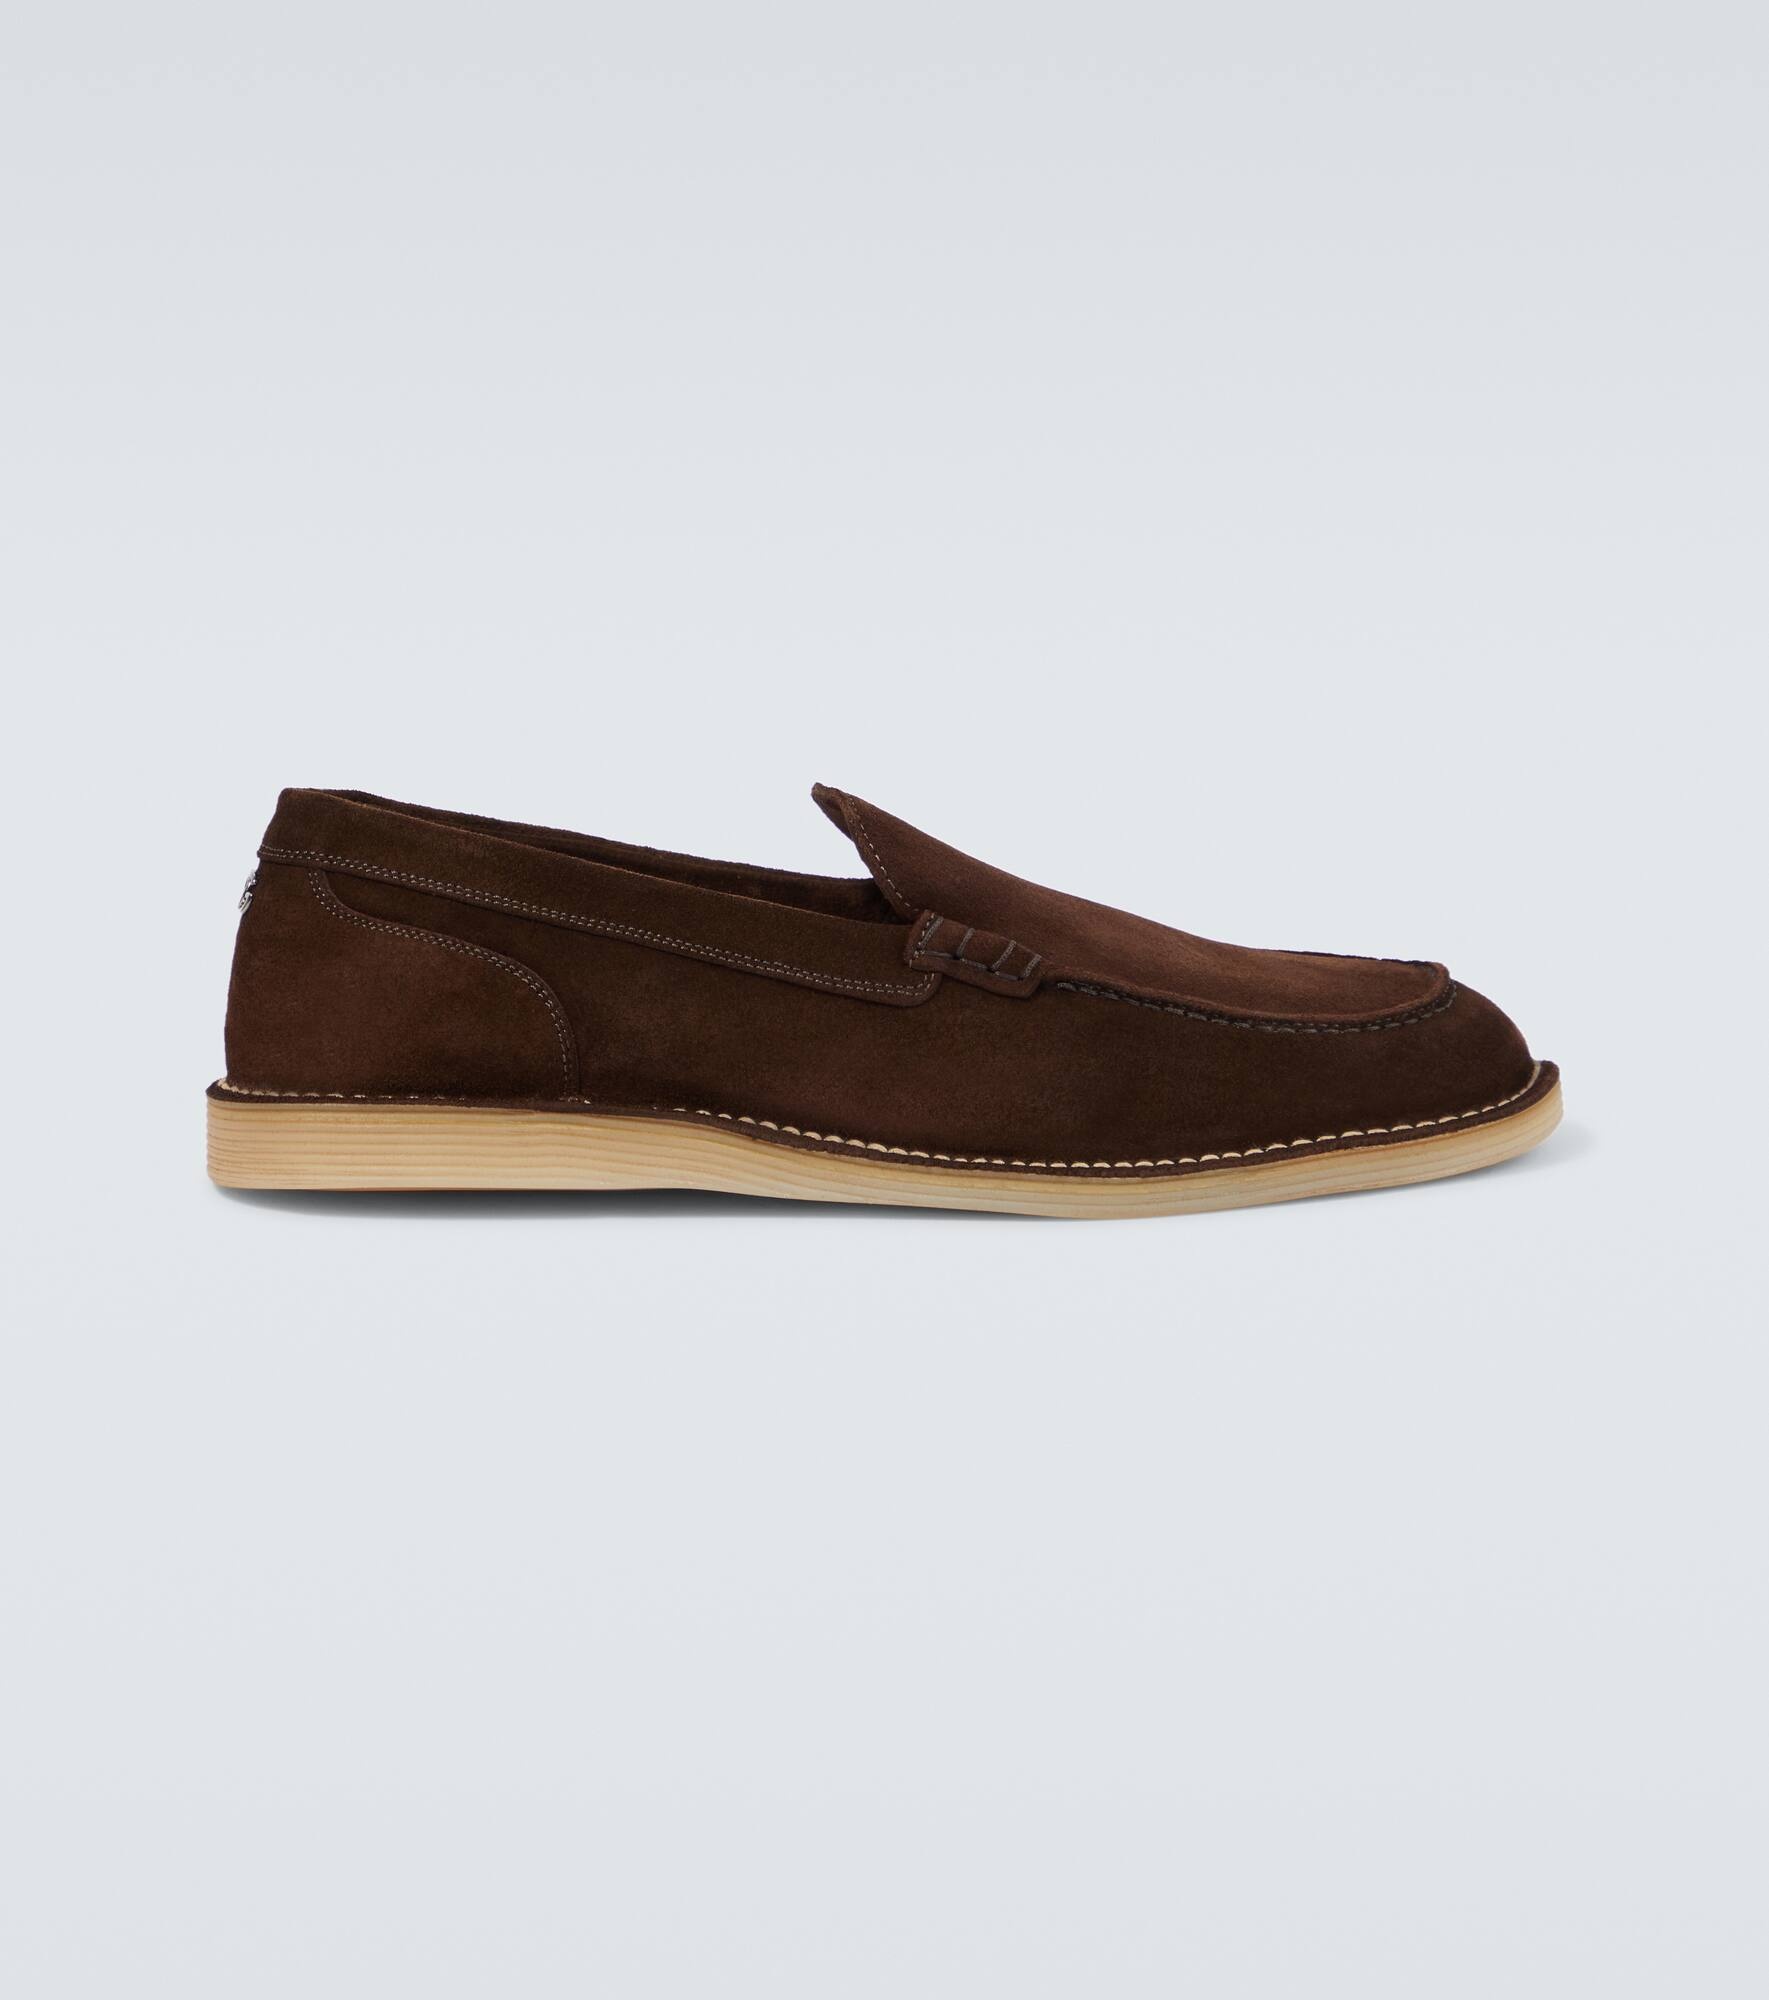 New Florio Ideal suede loafers - 1